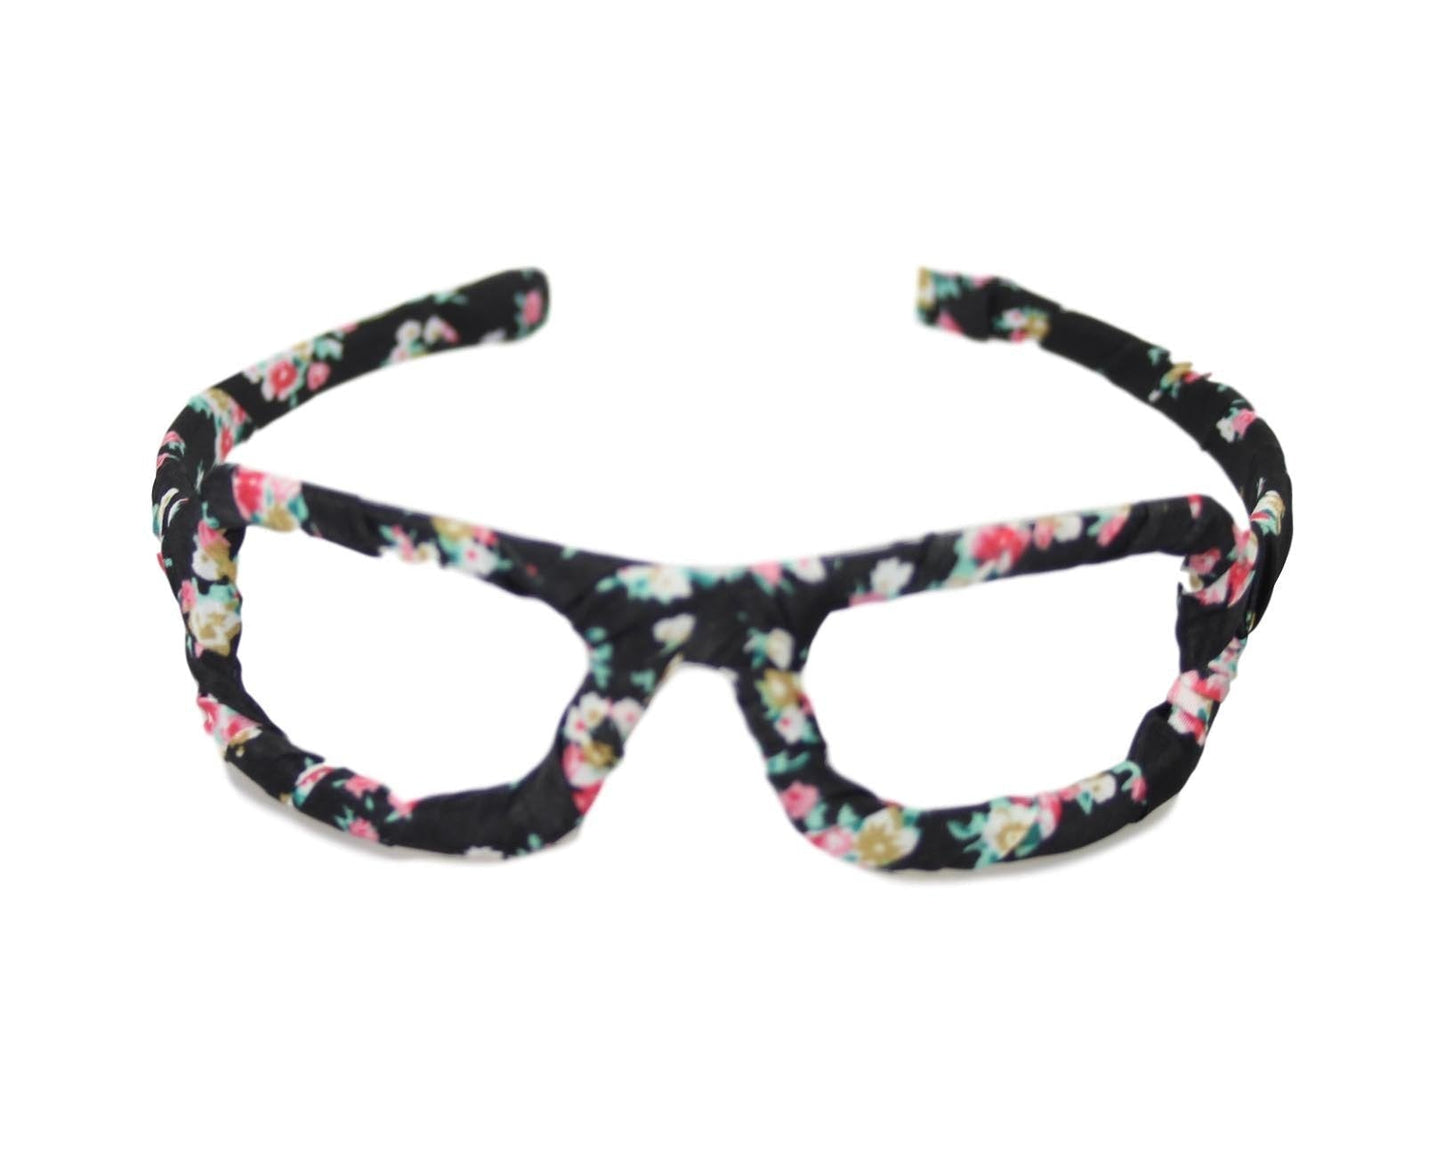 Girls Fancy Fabric Stylish Hair Head Band Glasses Design Assorted Colours 2644 (Large Letter Rate)